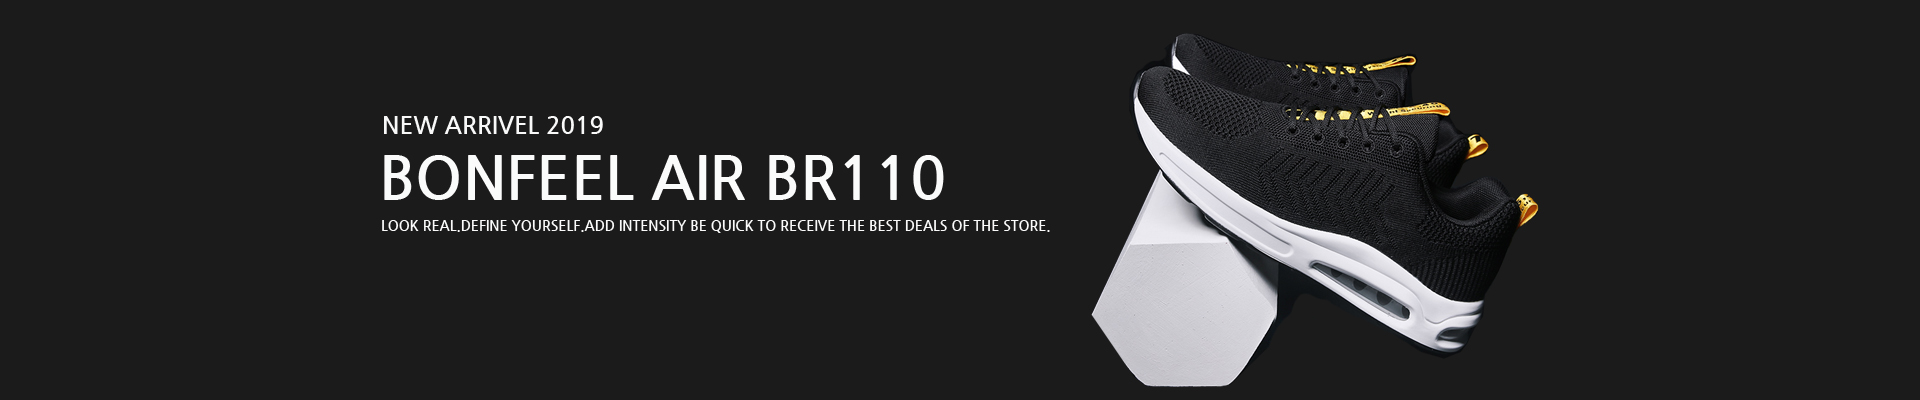 BR110